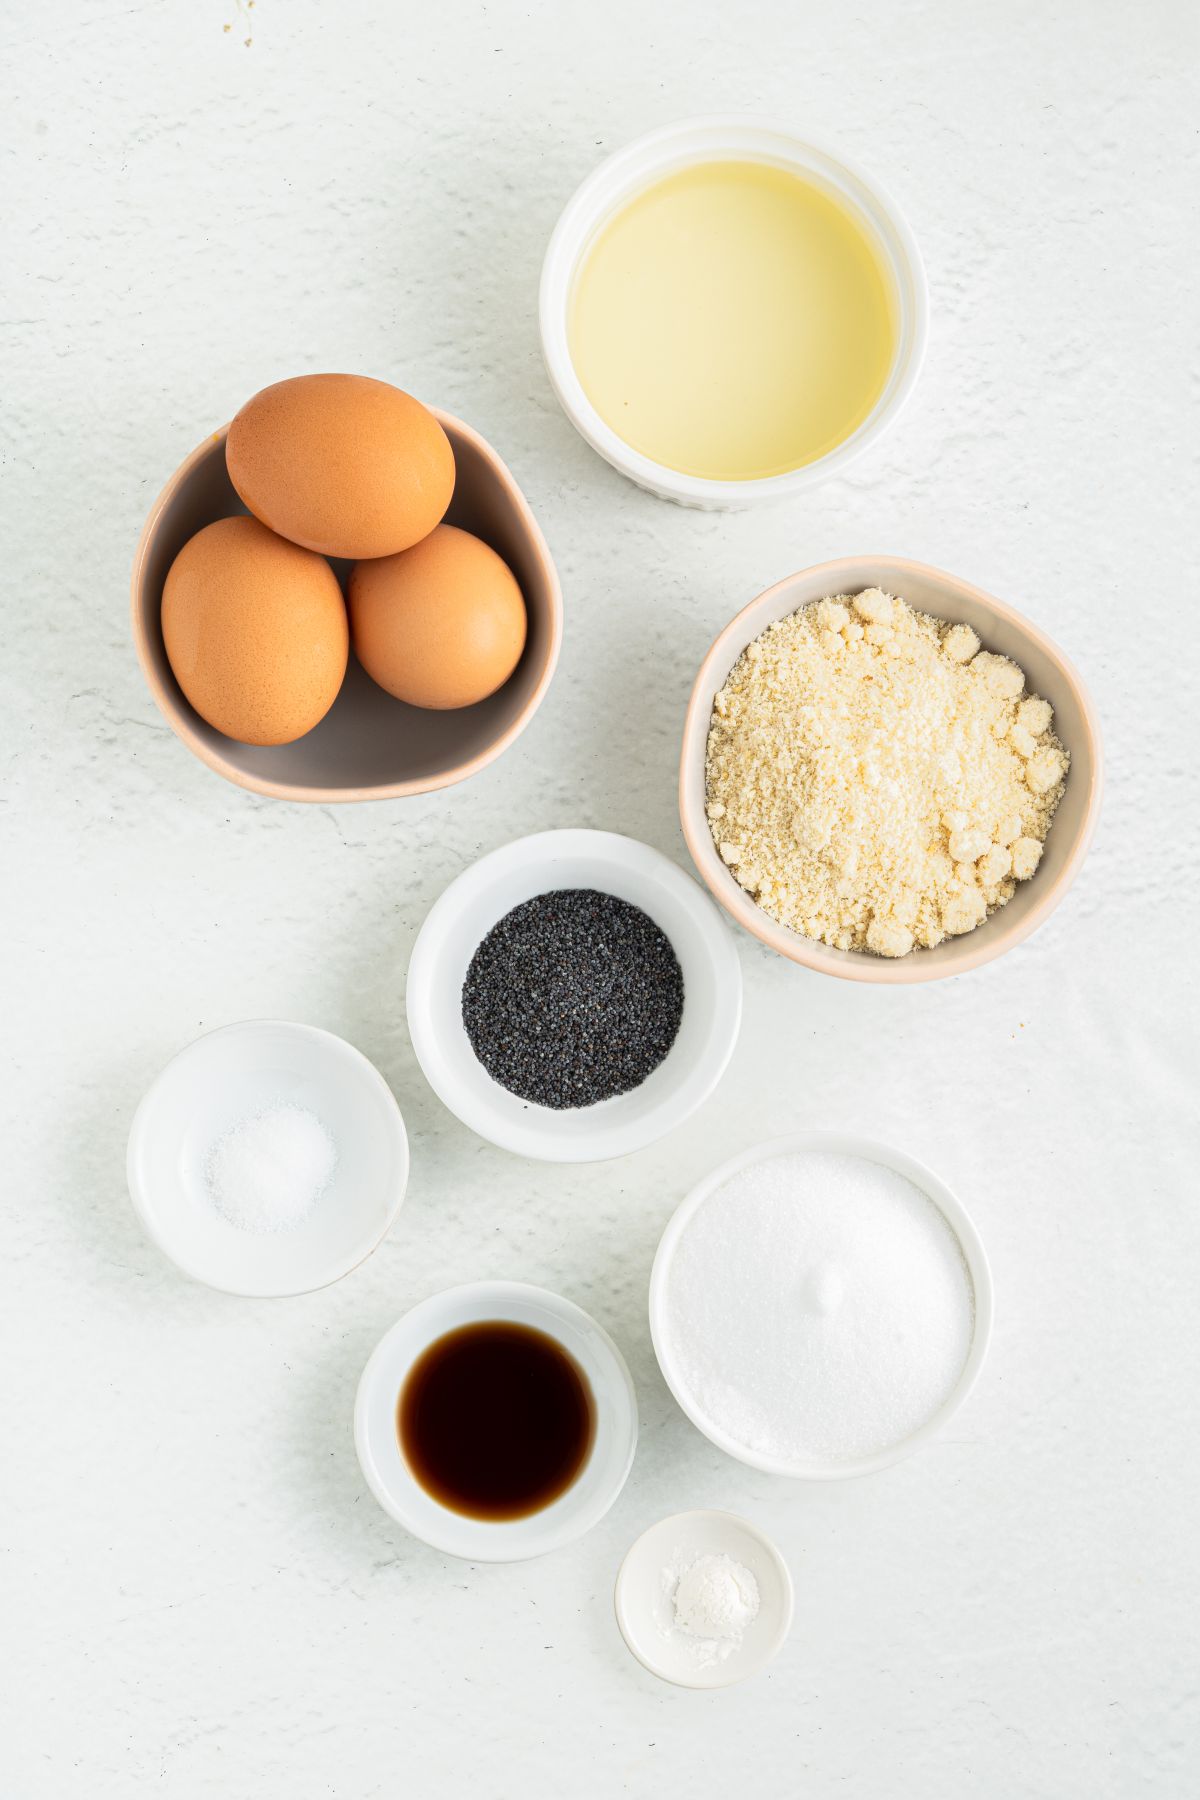 Keto Lemon and Poppy Seed Muffins ingredients